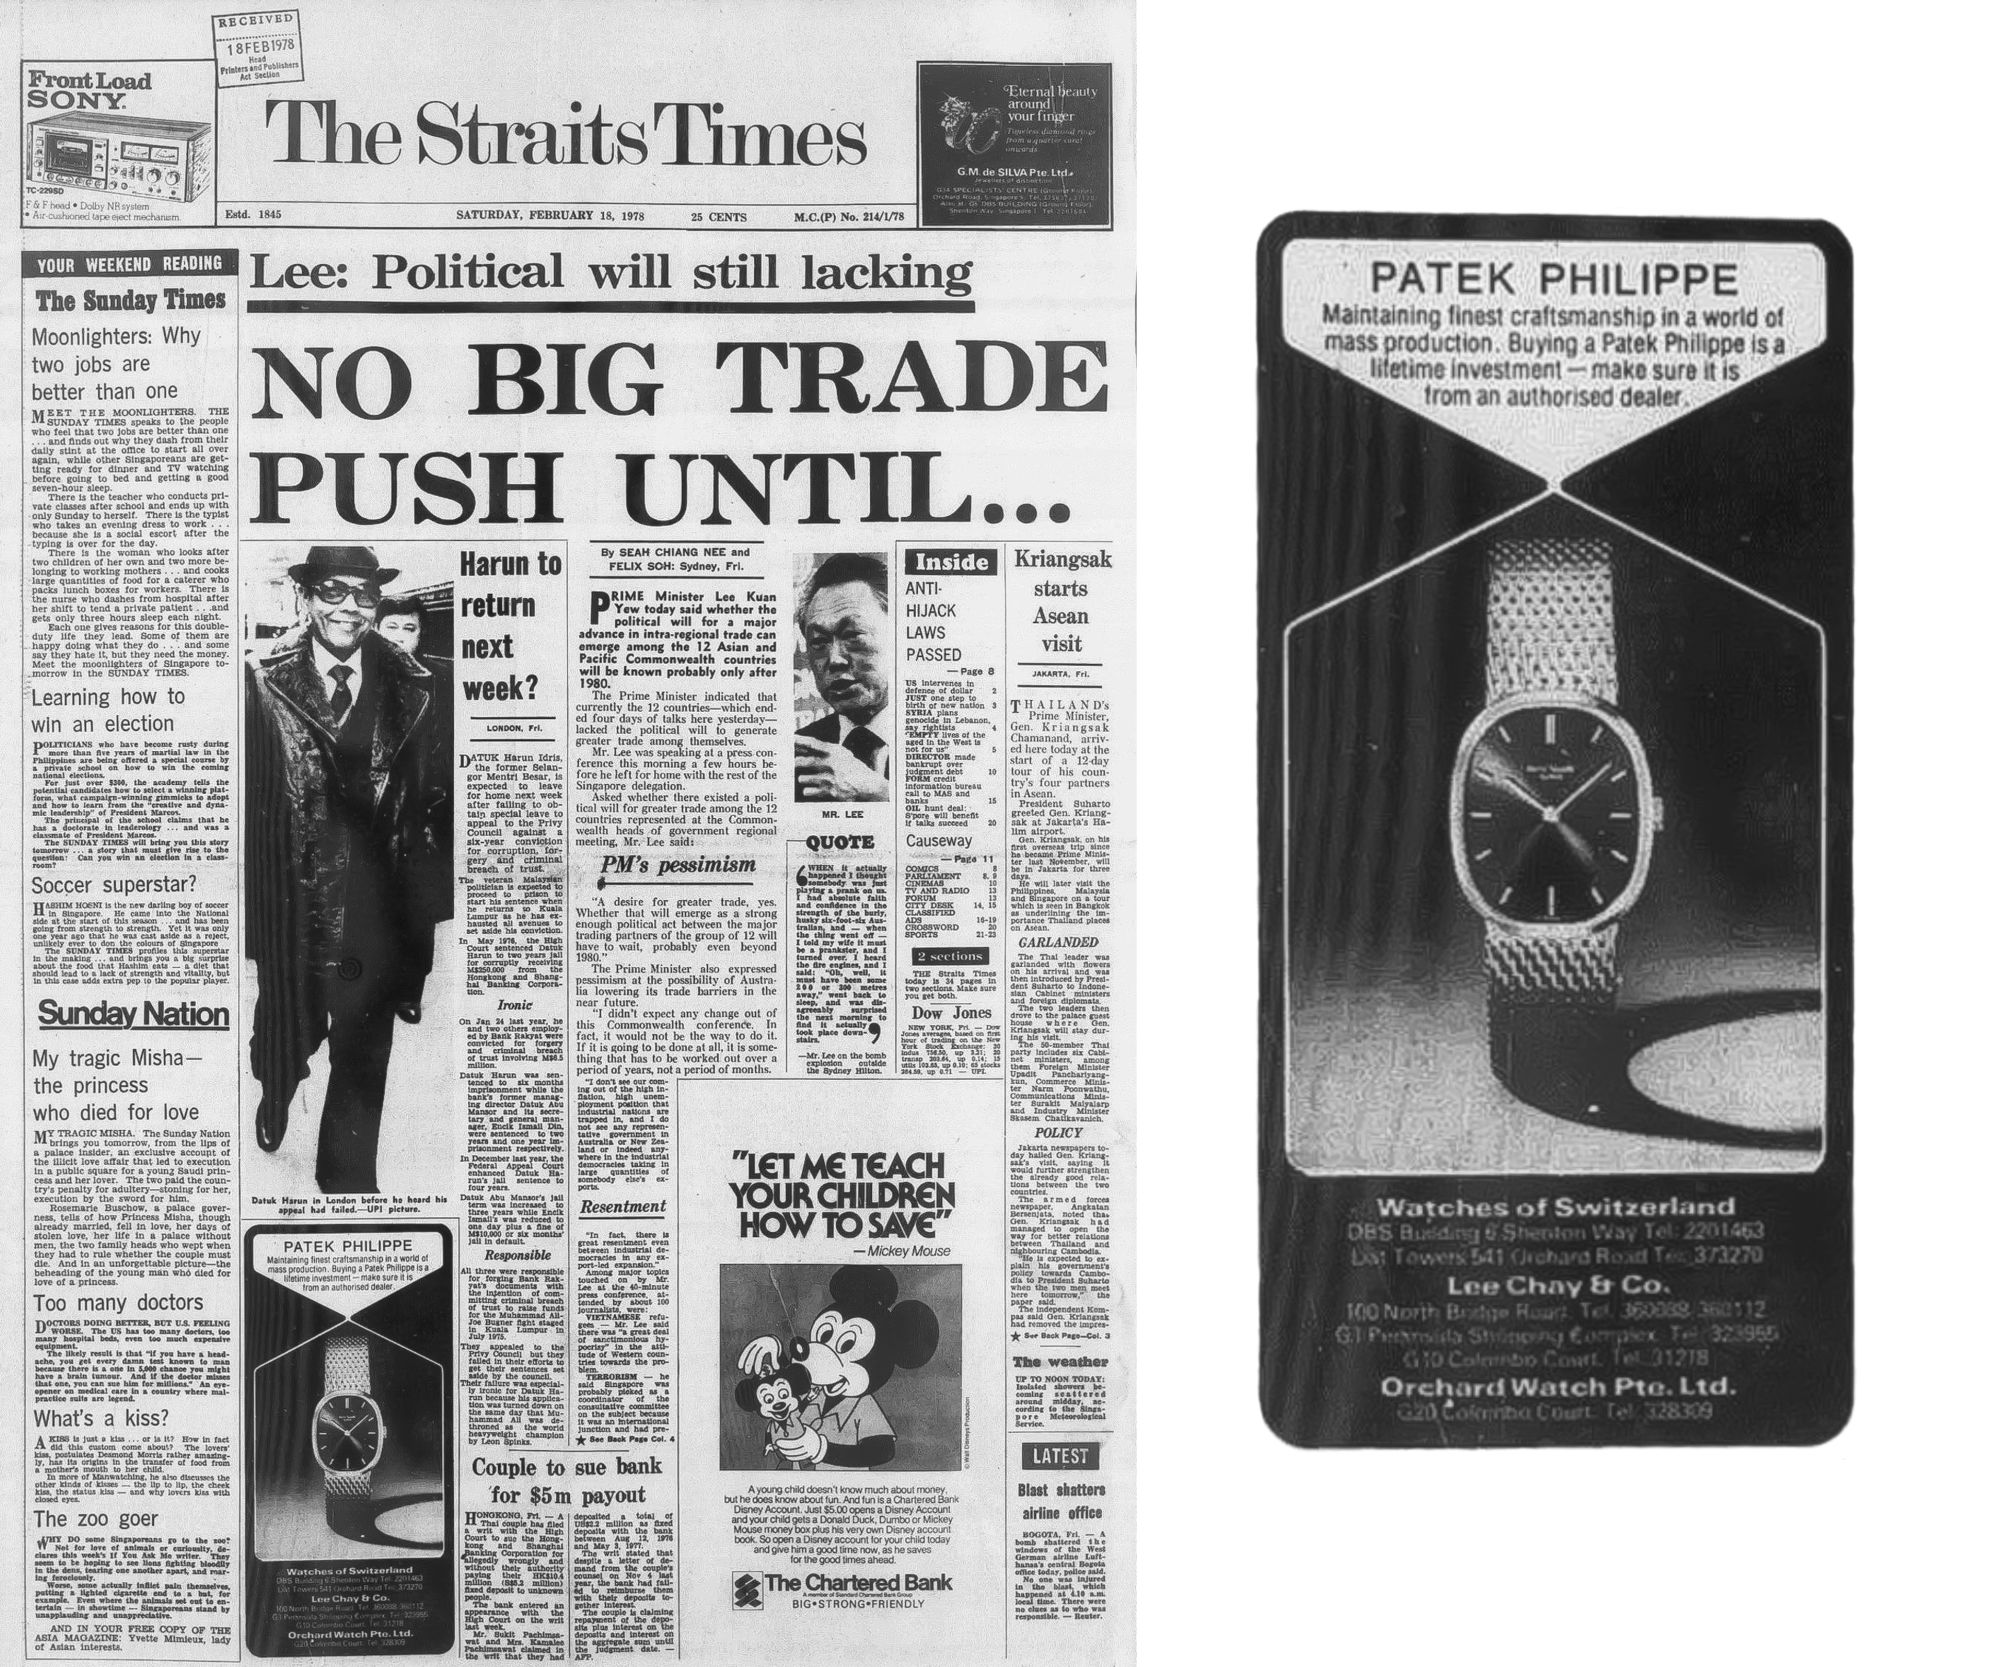 Patek Philippe advertisement featuring Lee Chay & Co and Orchard Watch in The Straits Times (18 February, 1978)